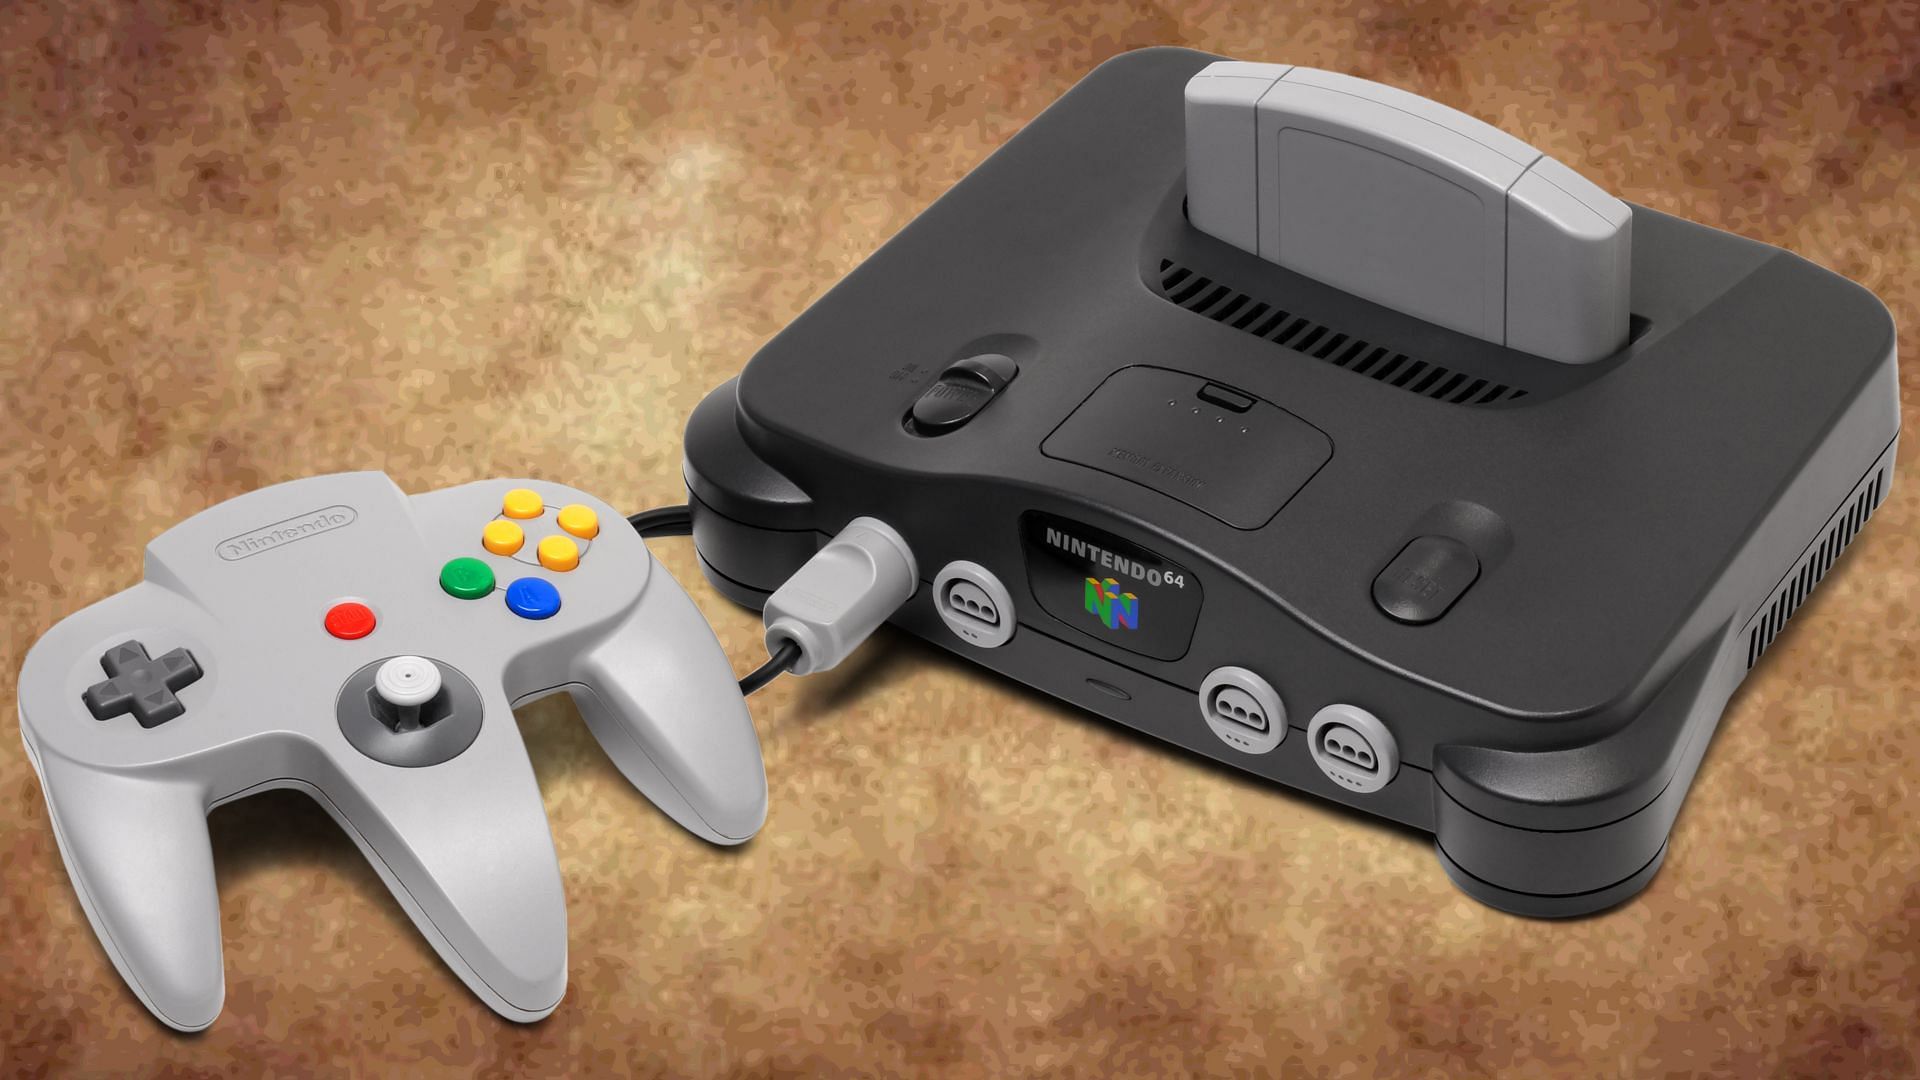 A Nintendo 64 over an aged paper background